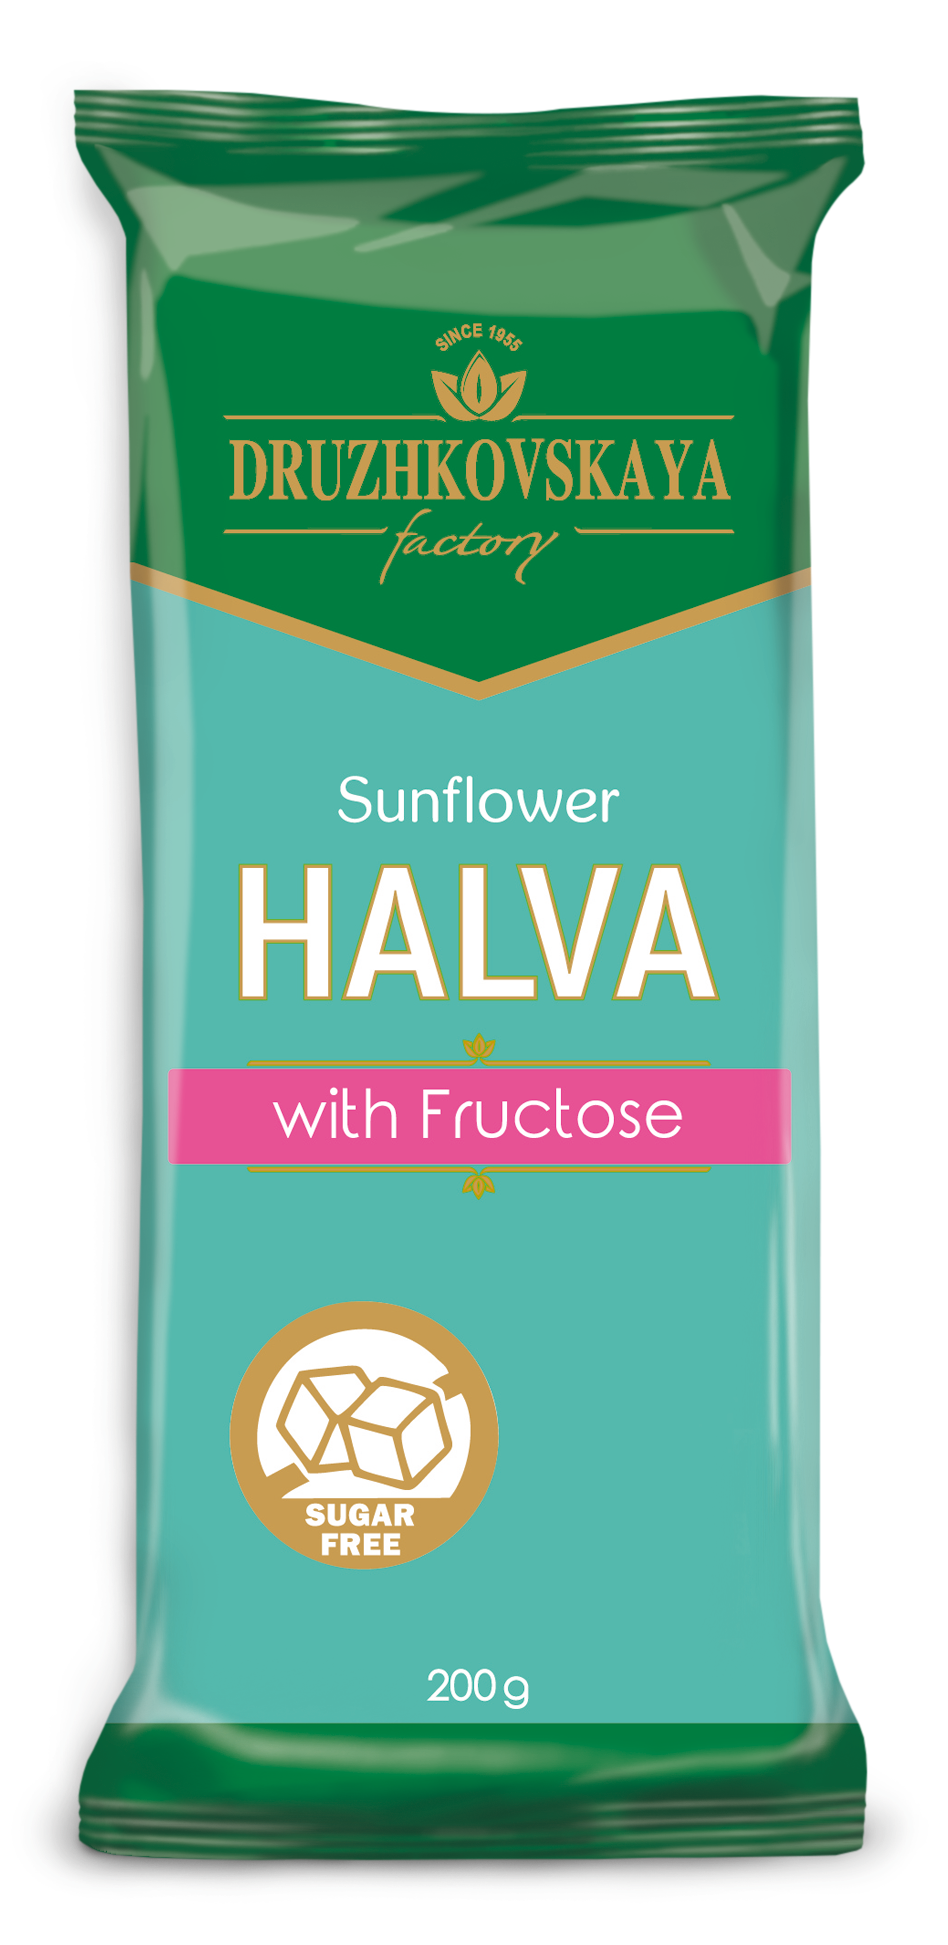 Sunflower Halva on Fructose (sugar free) Packed in Flow-pack, 200 g